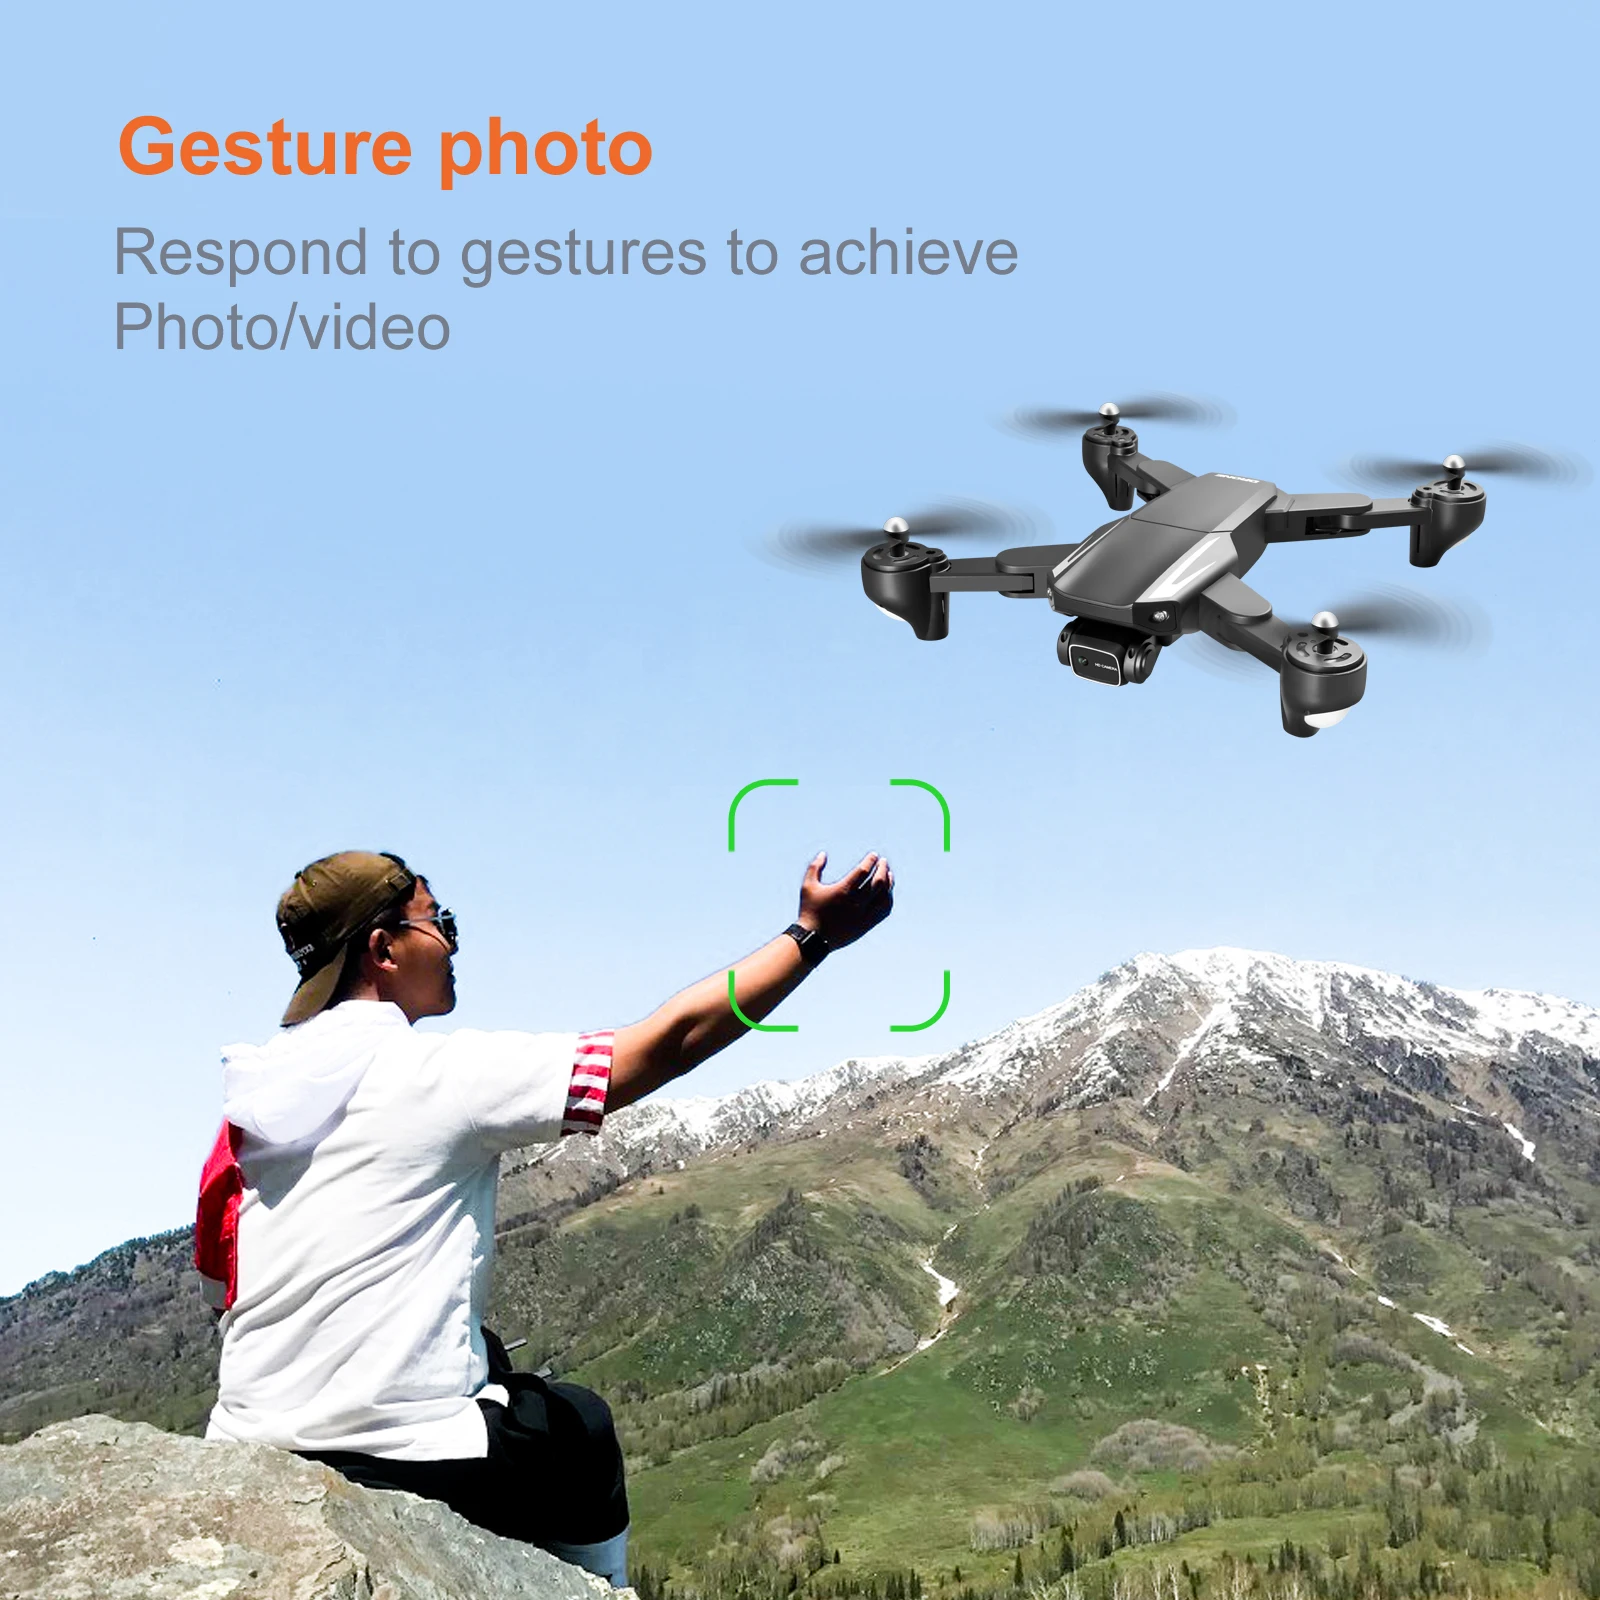 S93 Drone 4k HD Camera WiFi FPV ESC Aerial Photography RC Quadcopter Optical Flow Fixed Height Folding Dron Aircraft GIFT Boys enlarge